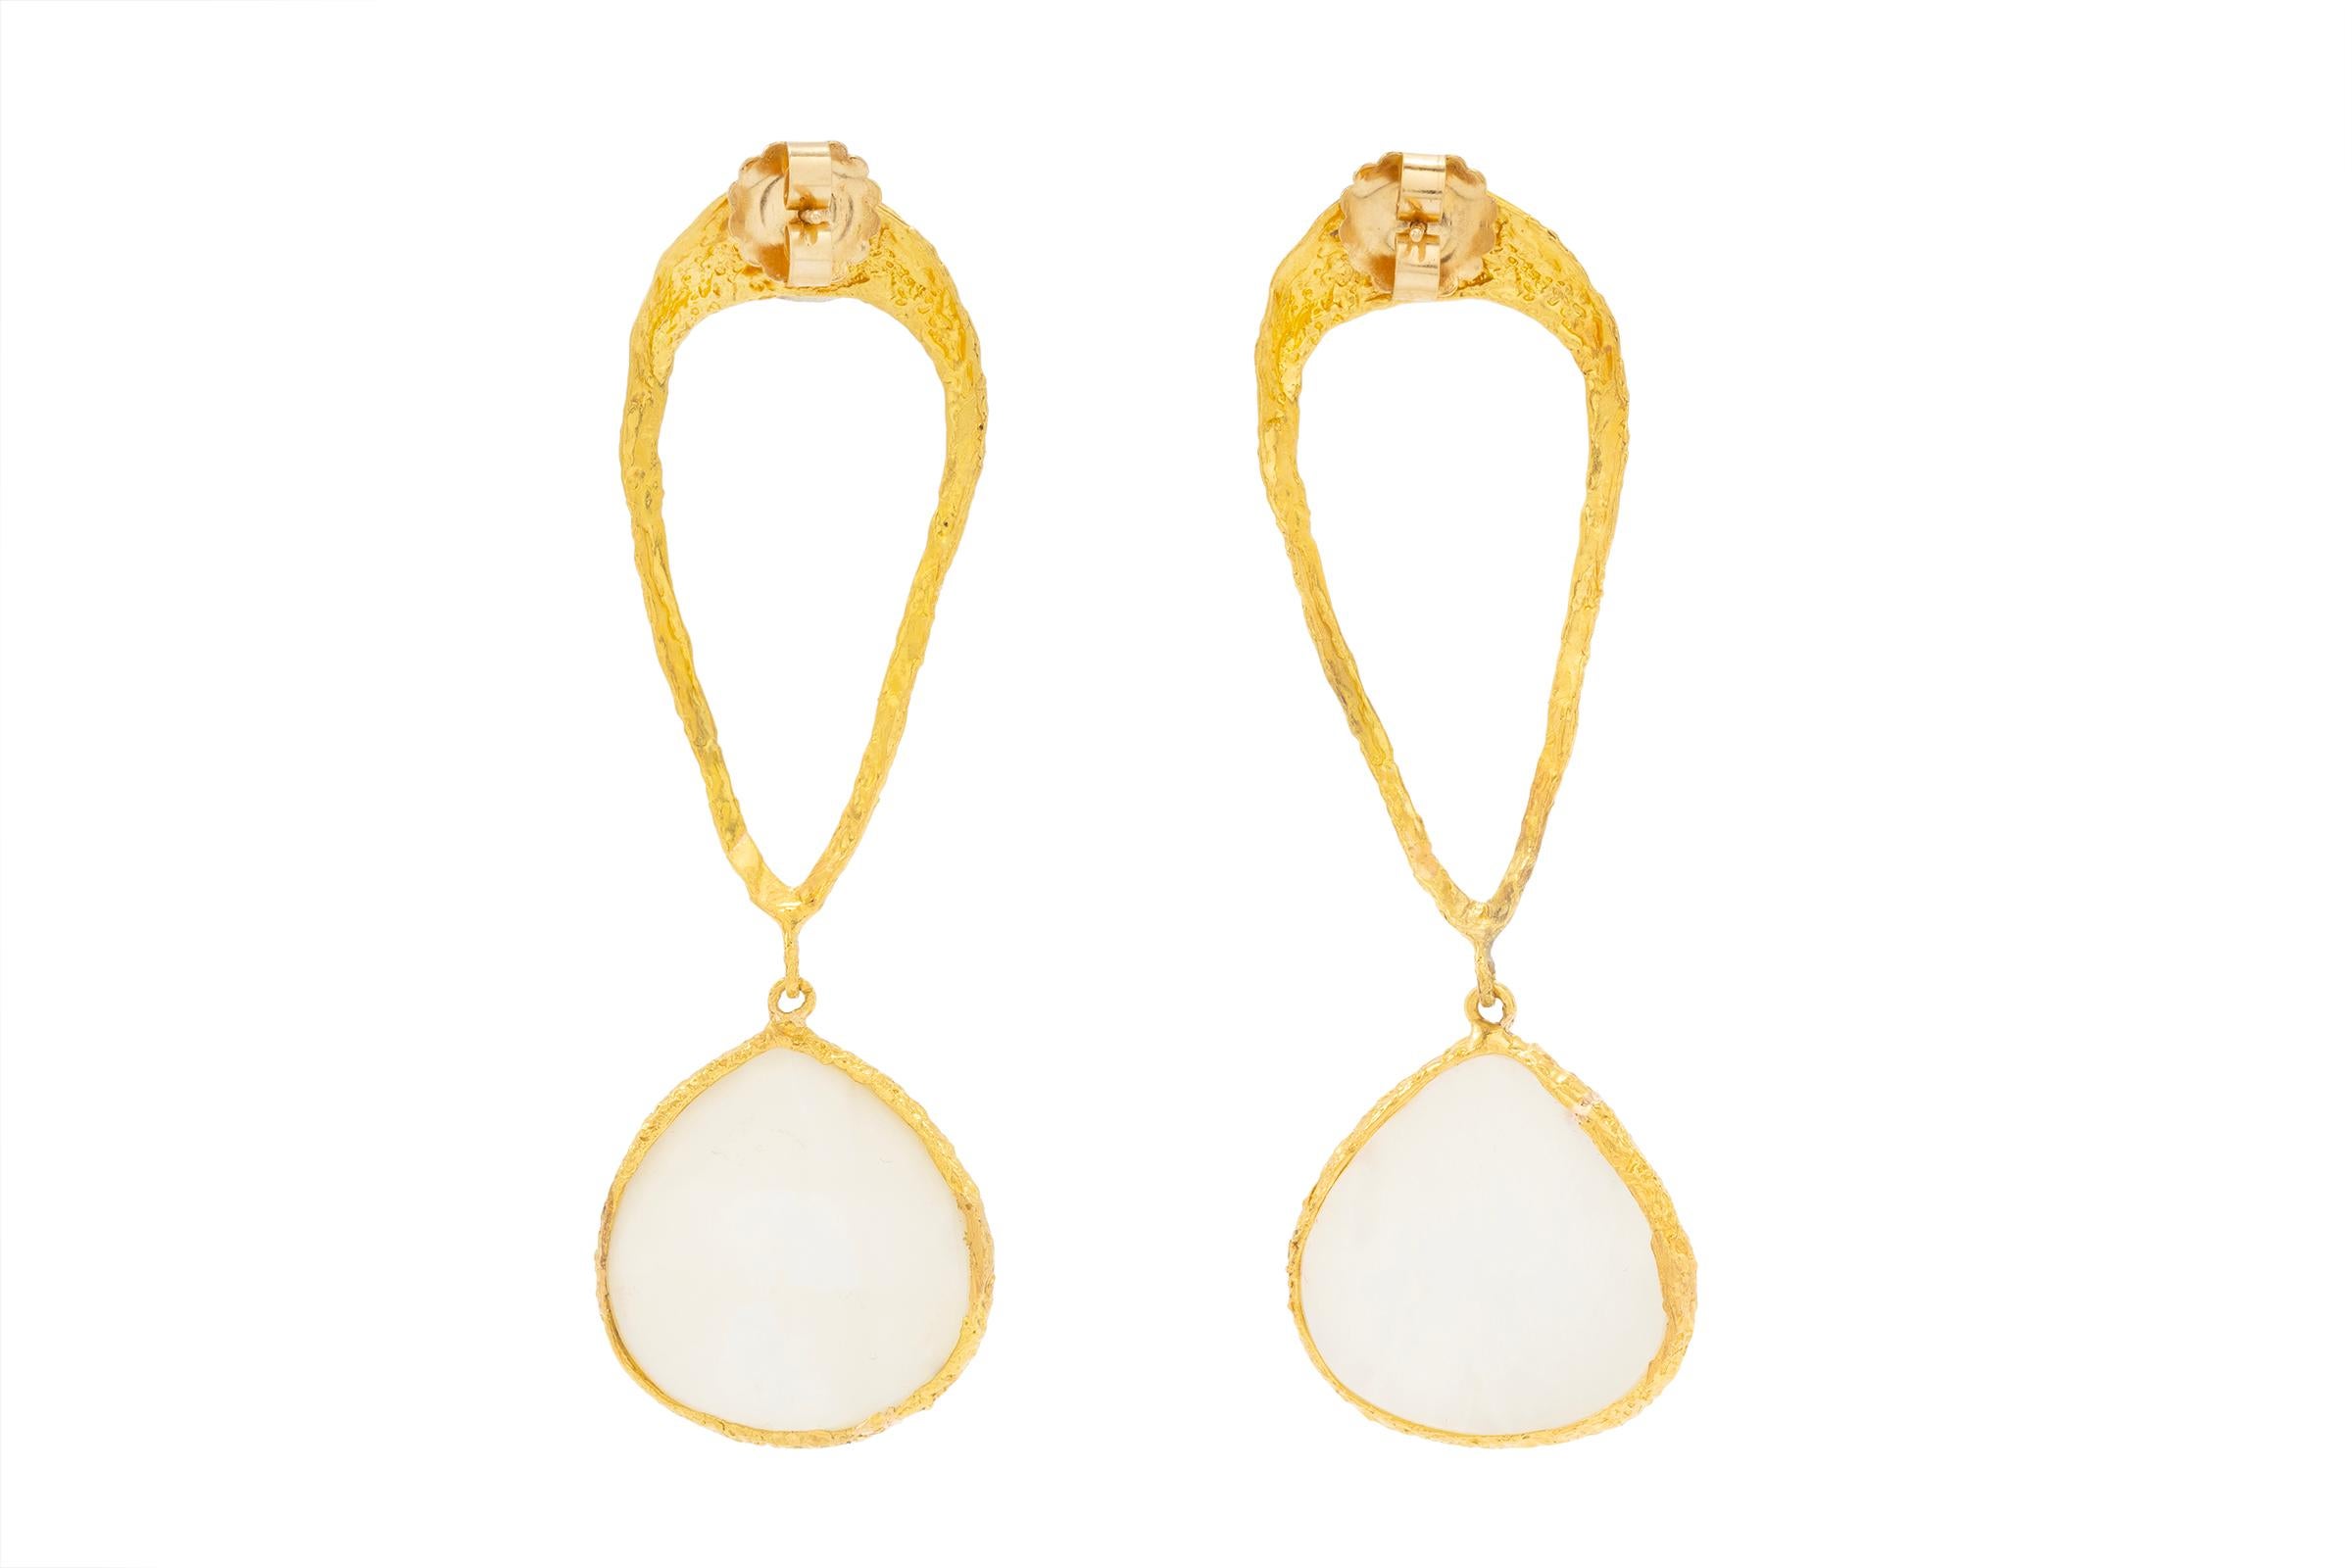 Soleil 22k Gold Pearl and Crystal Signature Teardrop Earrings, by Tagili In New Condition For Sale In New York, NY